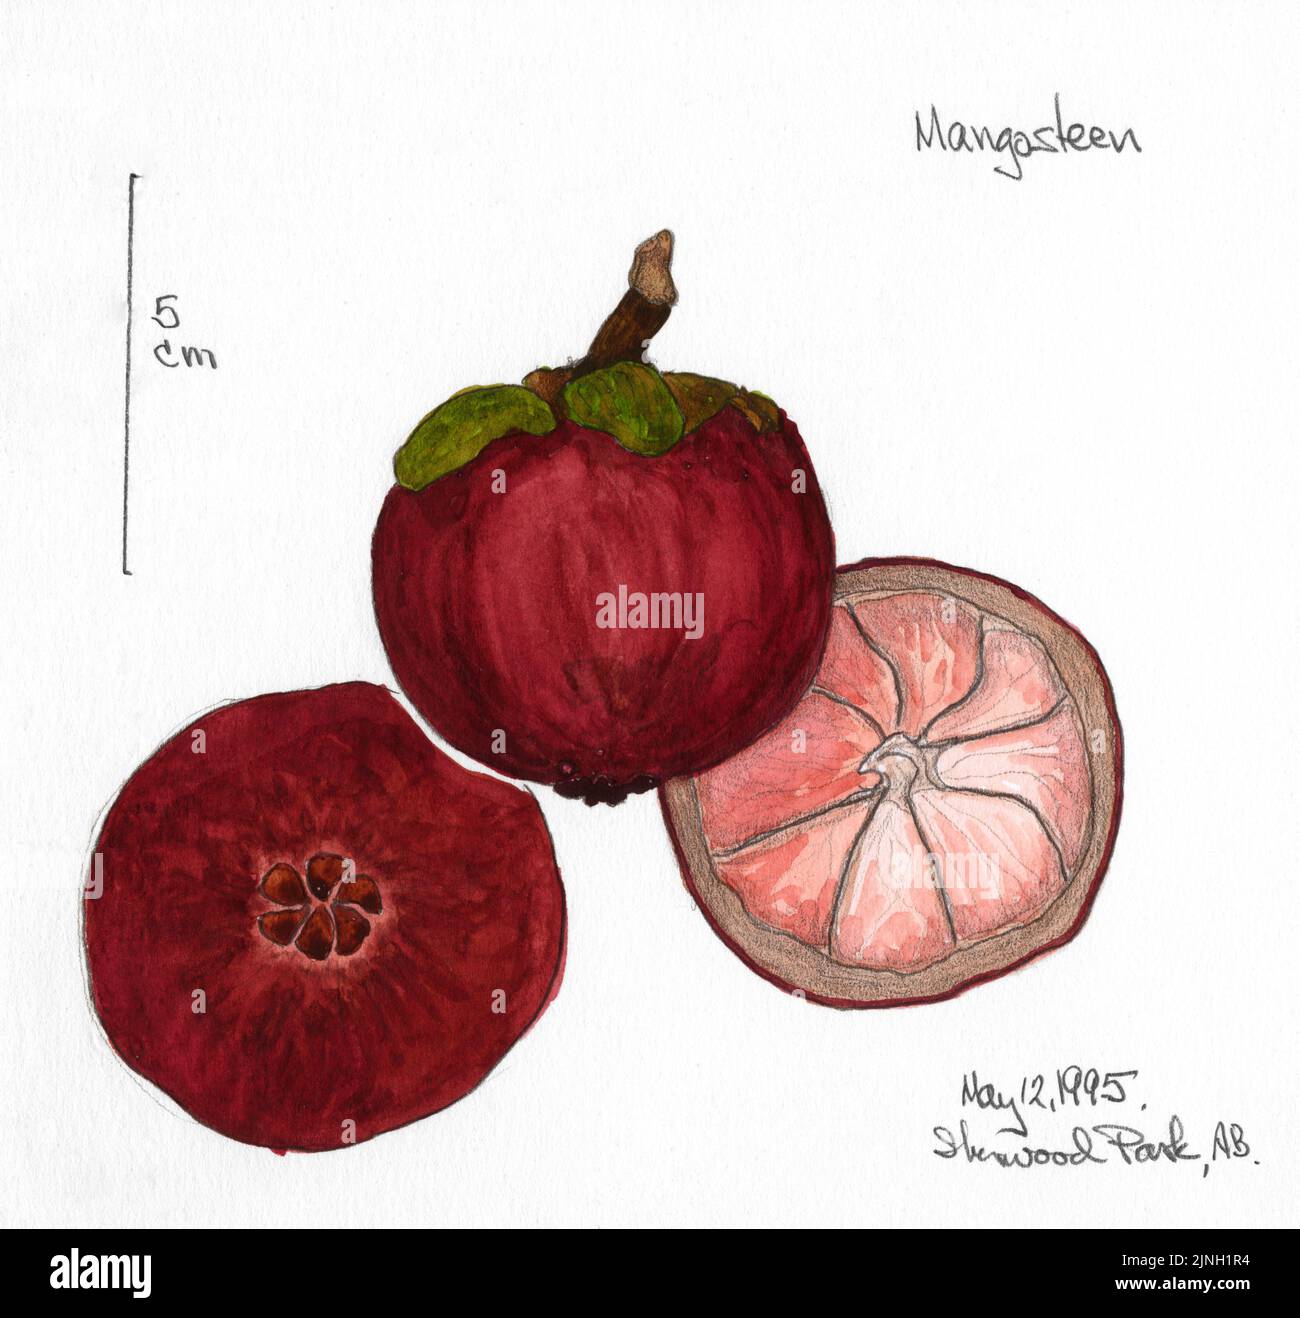 Mangosteen painted by A. Kåre Hellum at Sherwood Park, AB May 12, 1995 Stock Photo